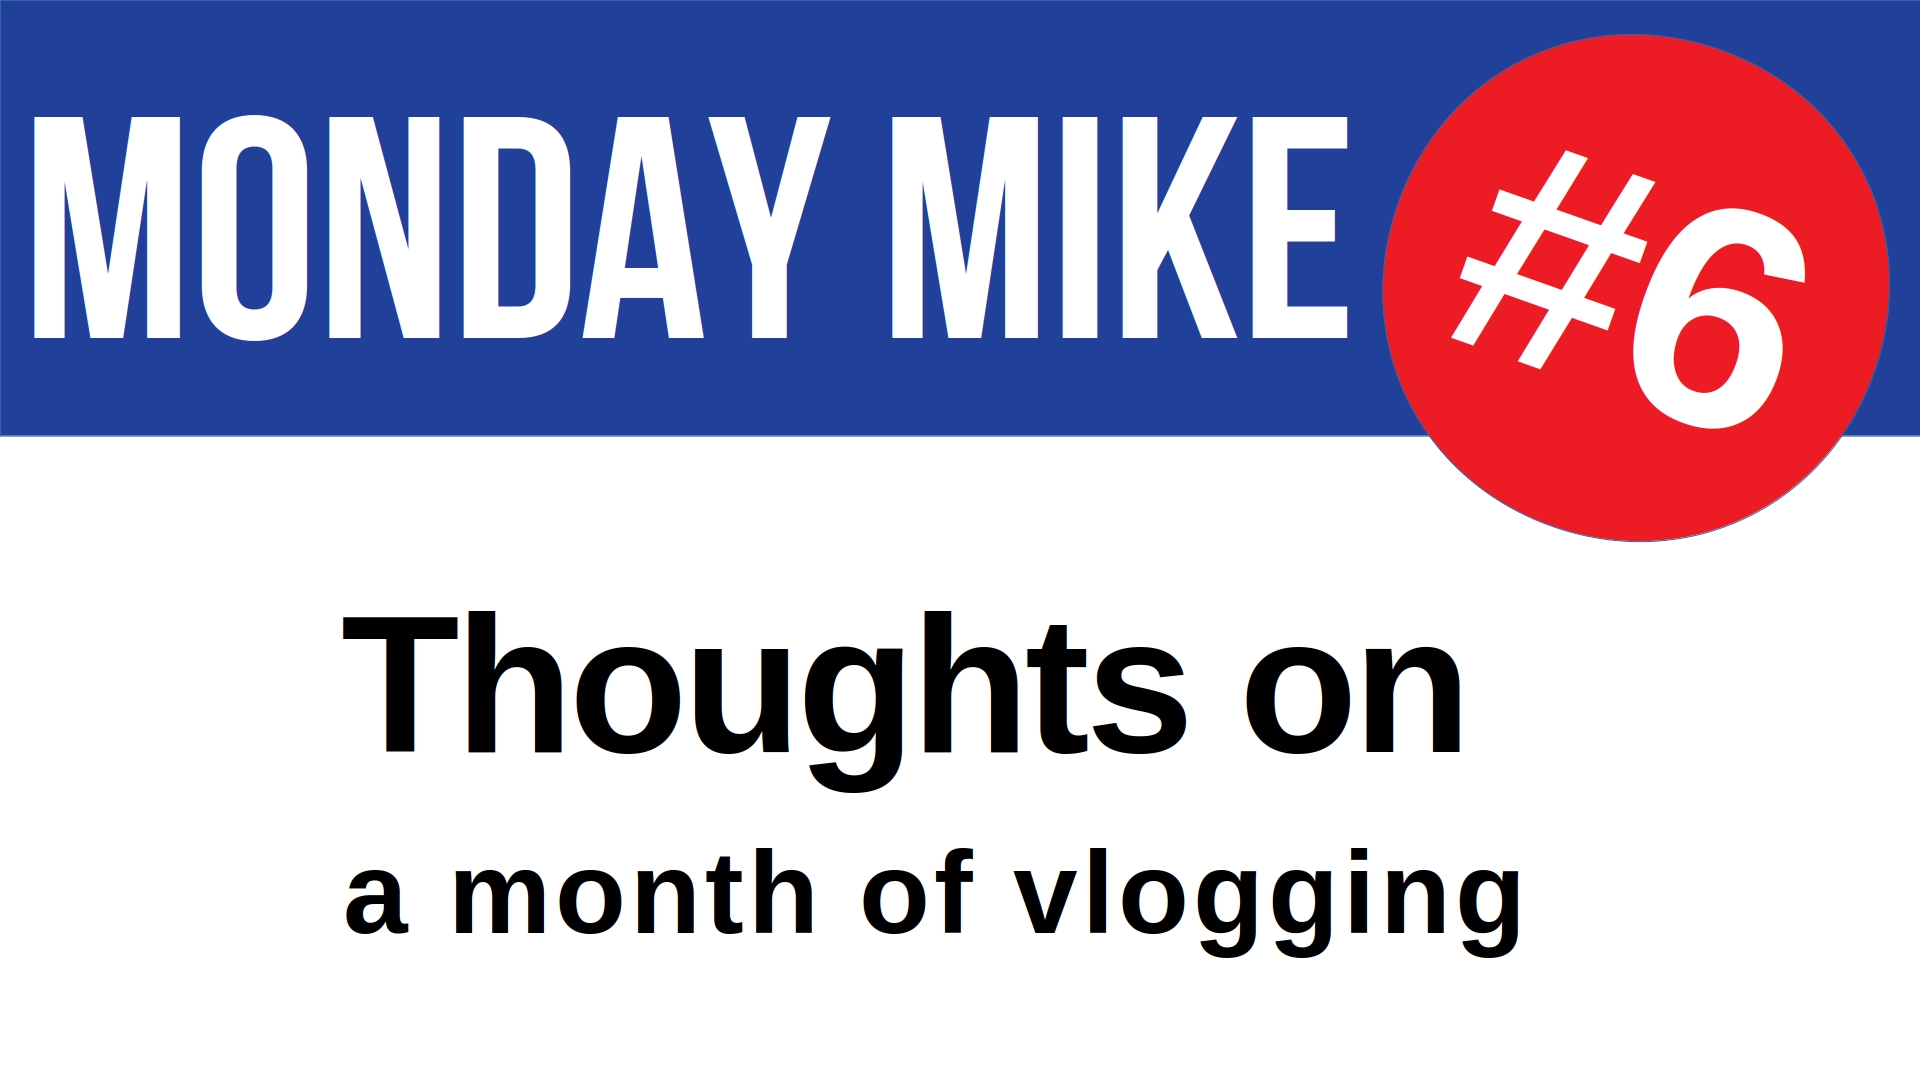 Monday Mike 6: Thoughts on a month of vlogging